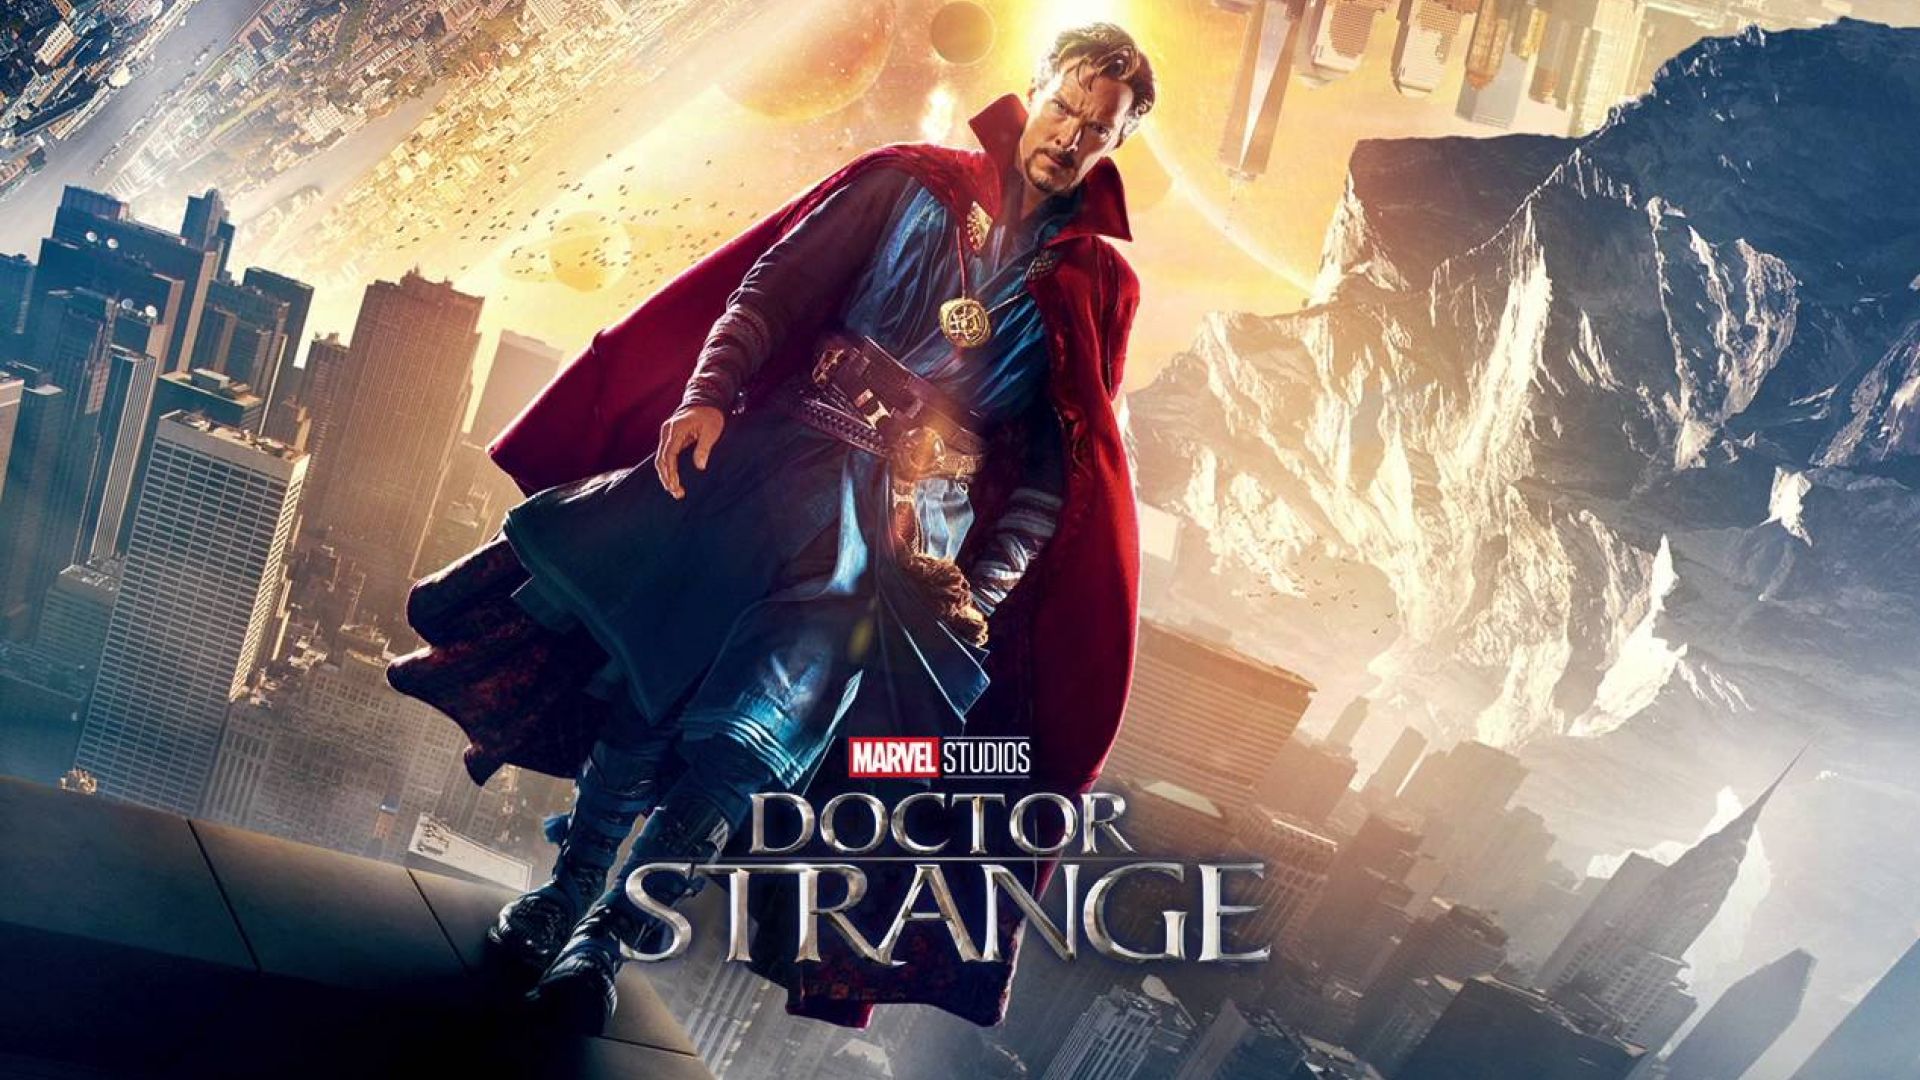 Michael Giacchino&#039;s &#039;Doctor Strange&#039; Theme has been released